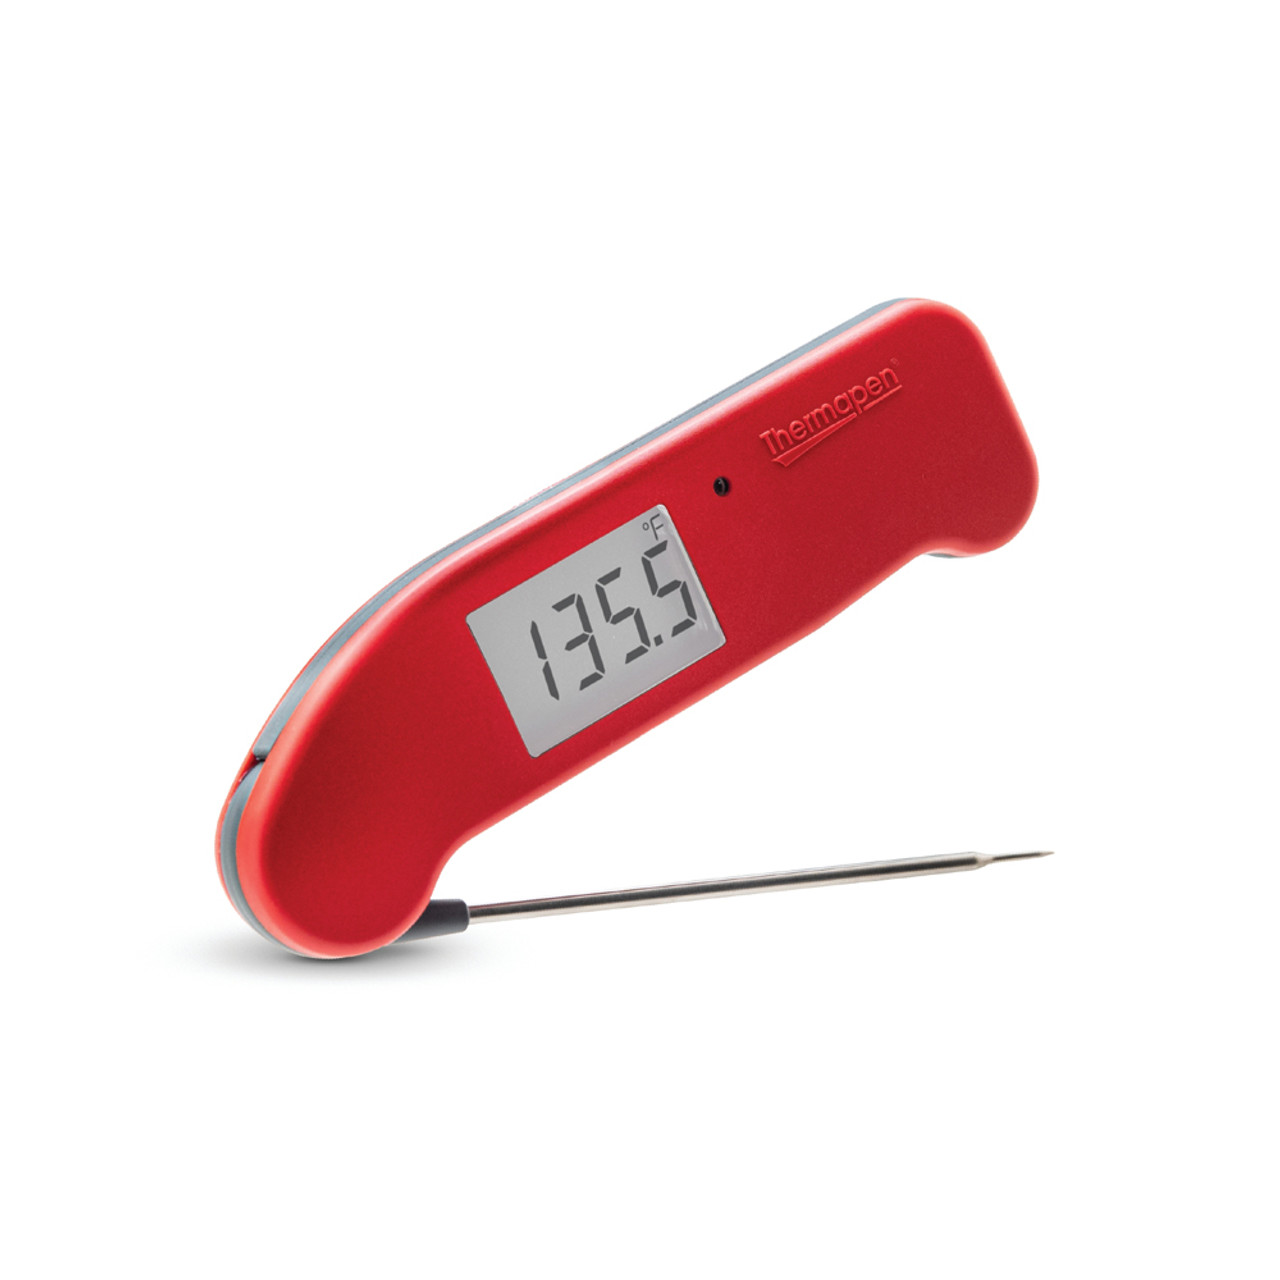 The Cherry - Digital thermometers for cake & cooking